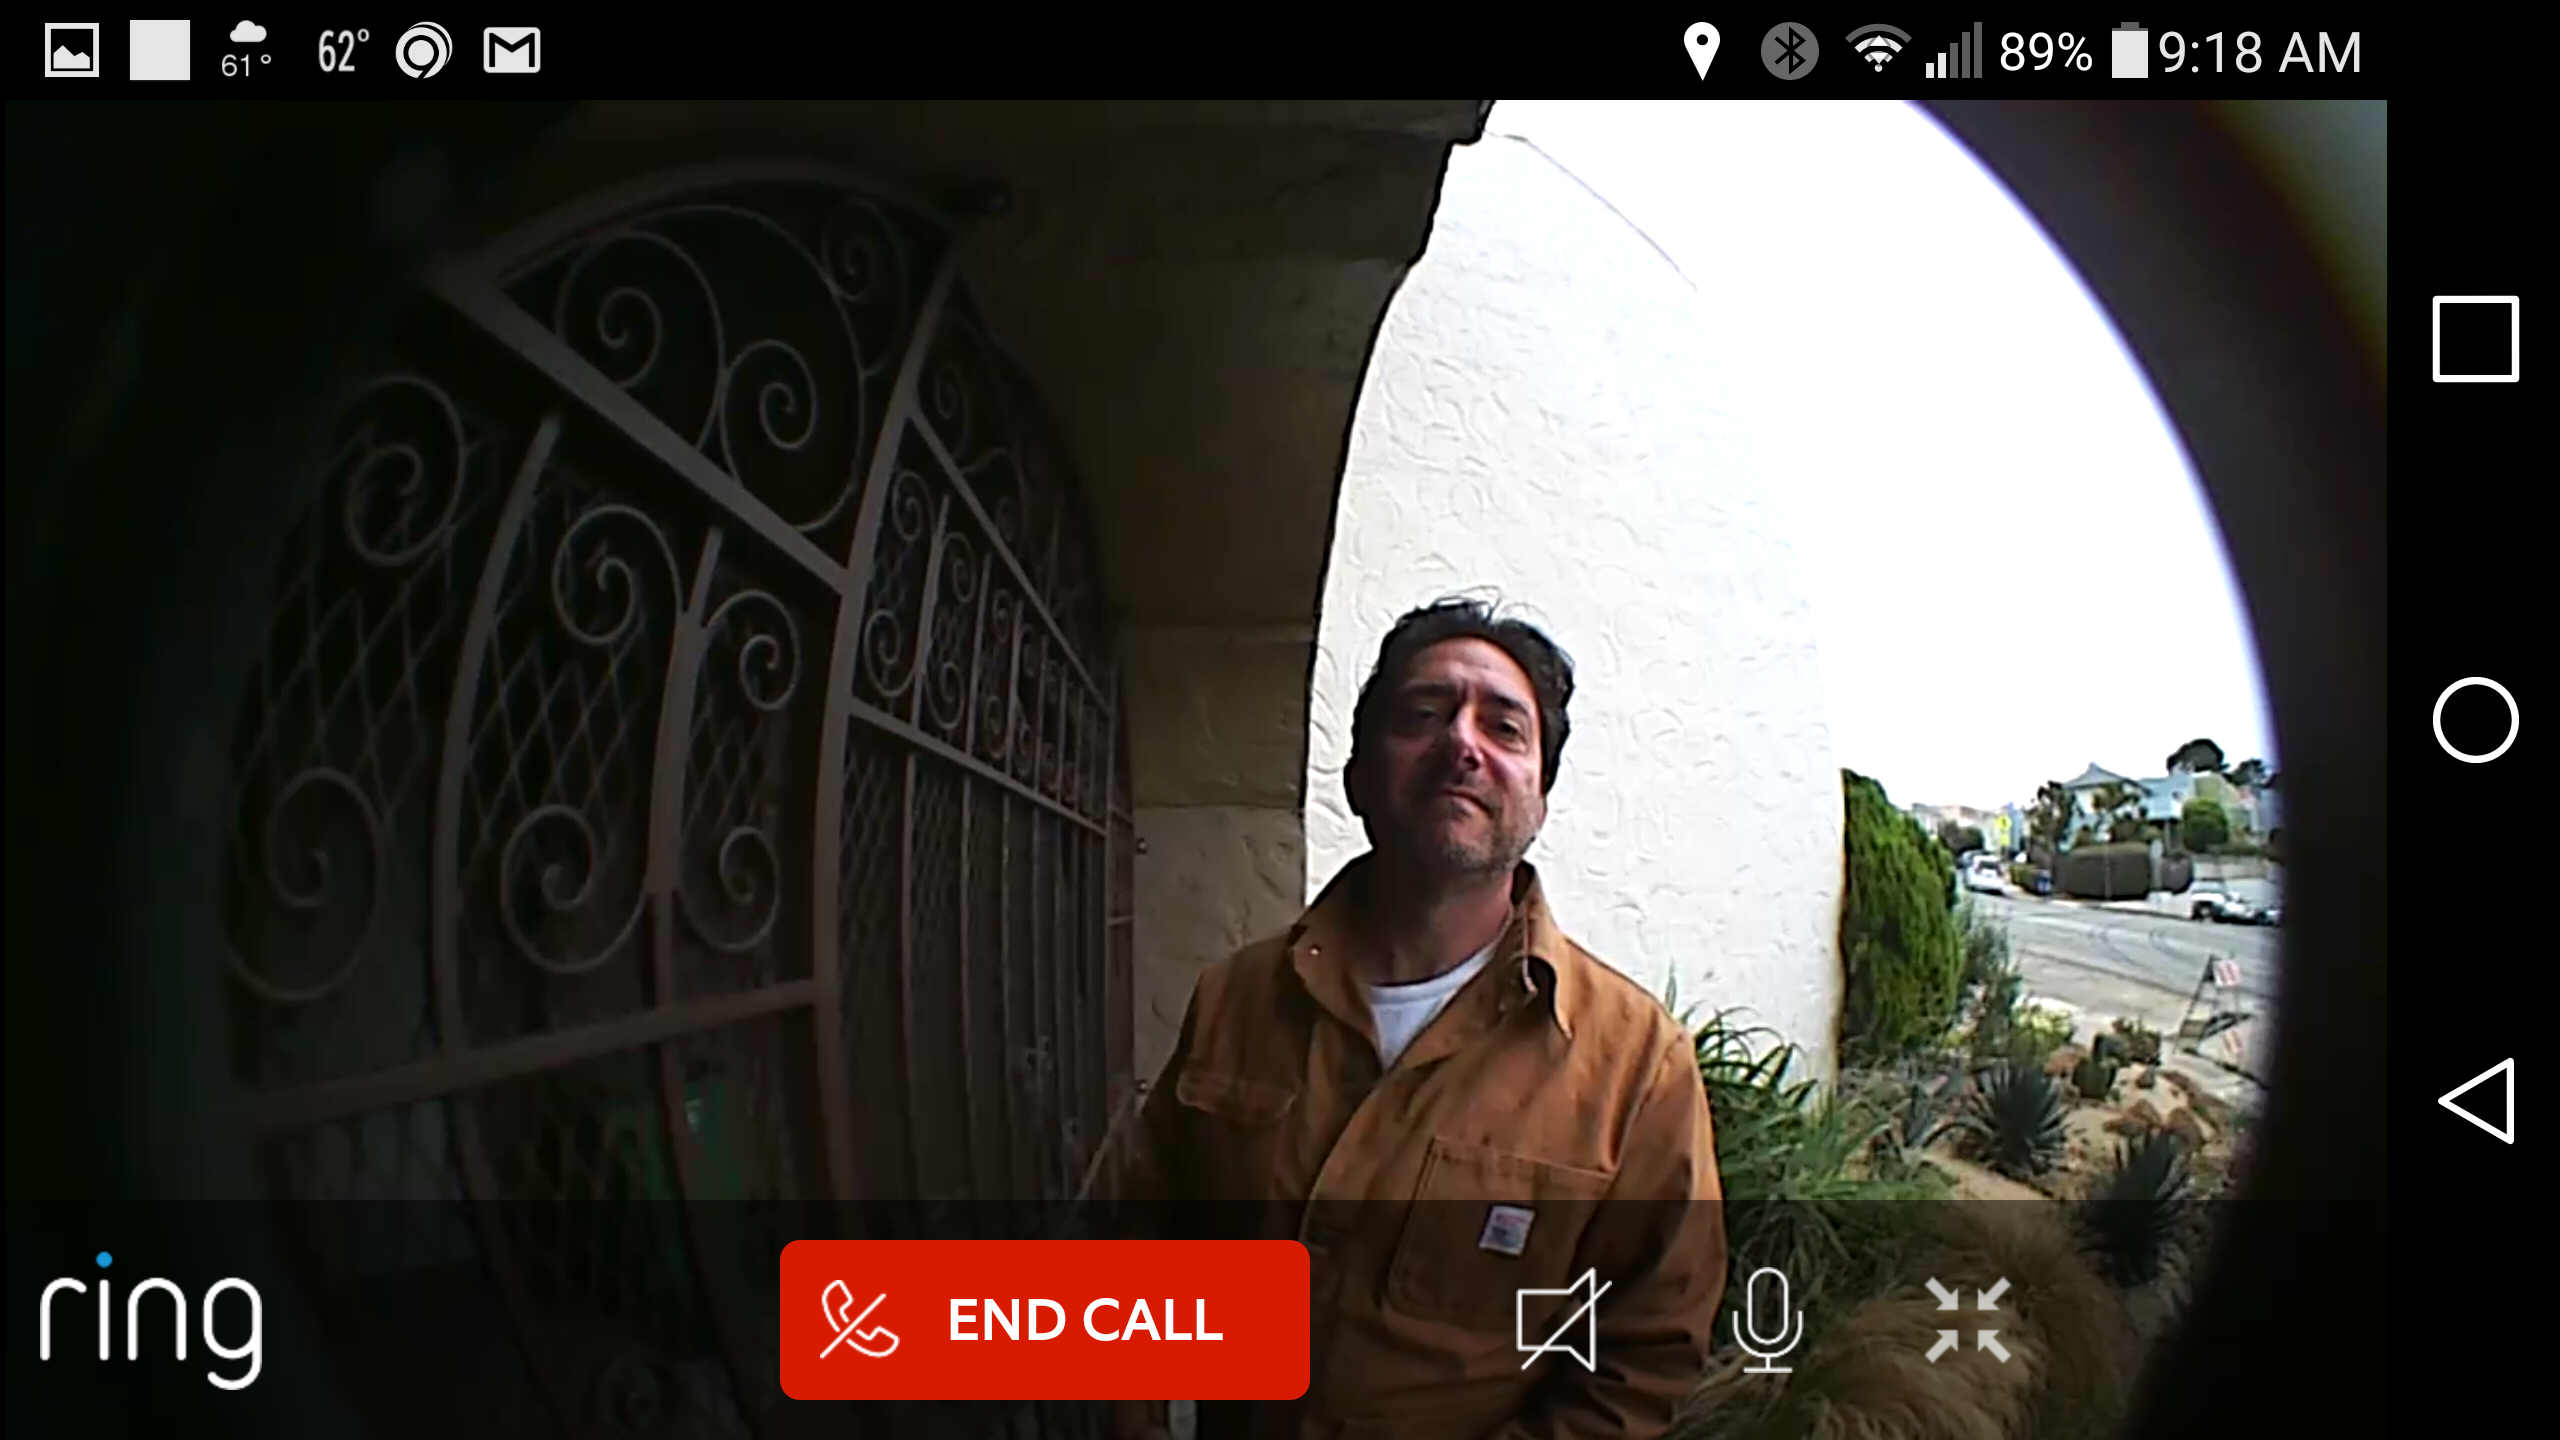 how does the ring doorbell work